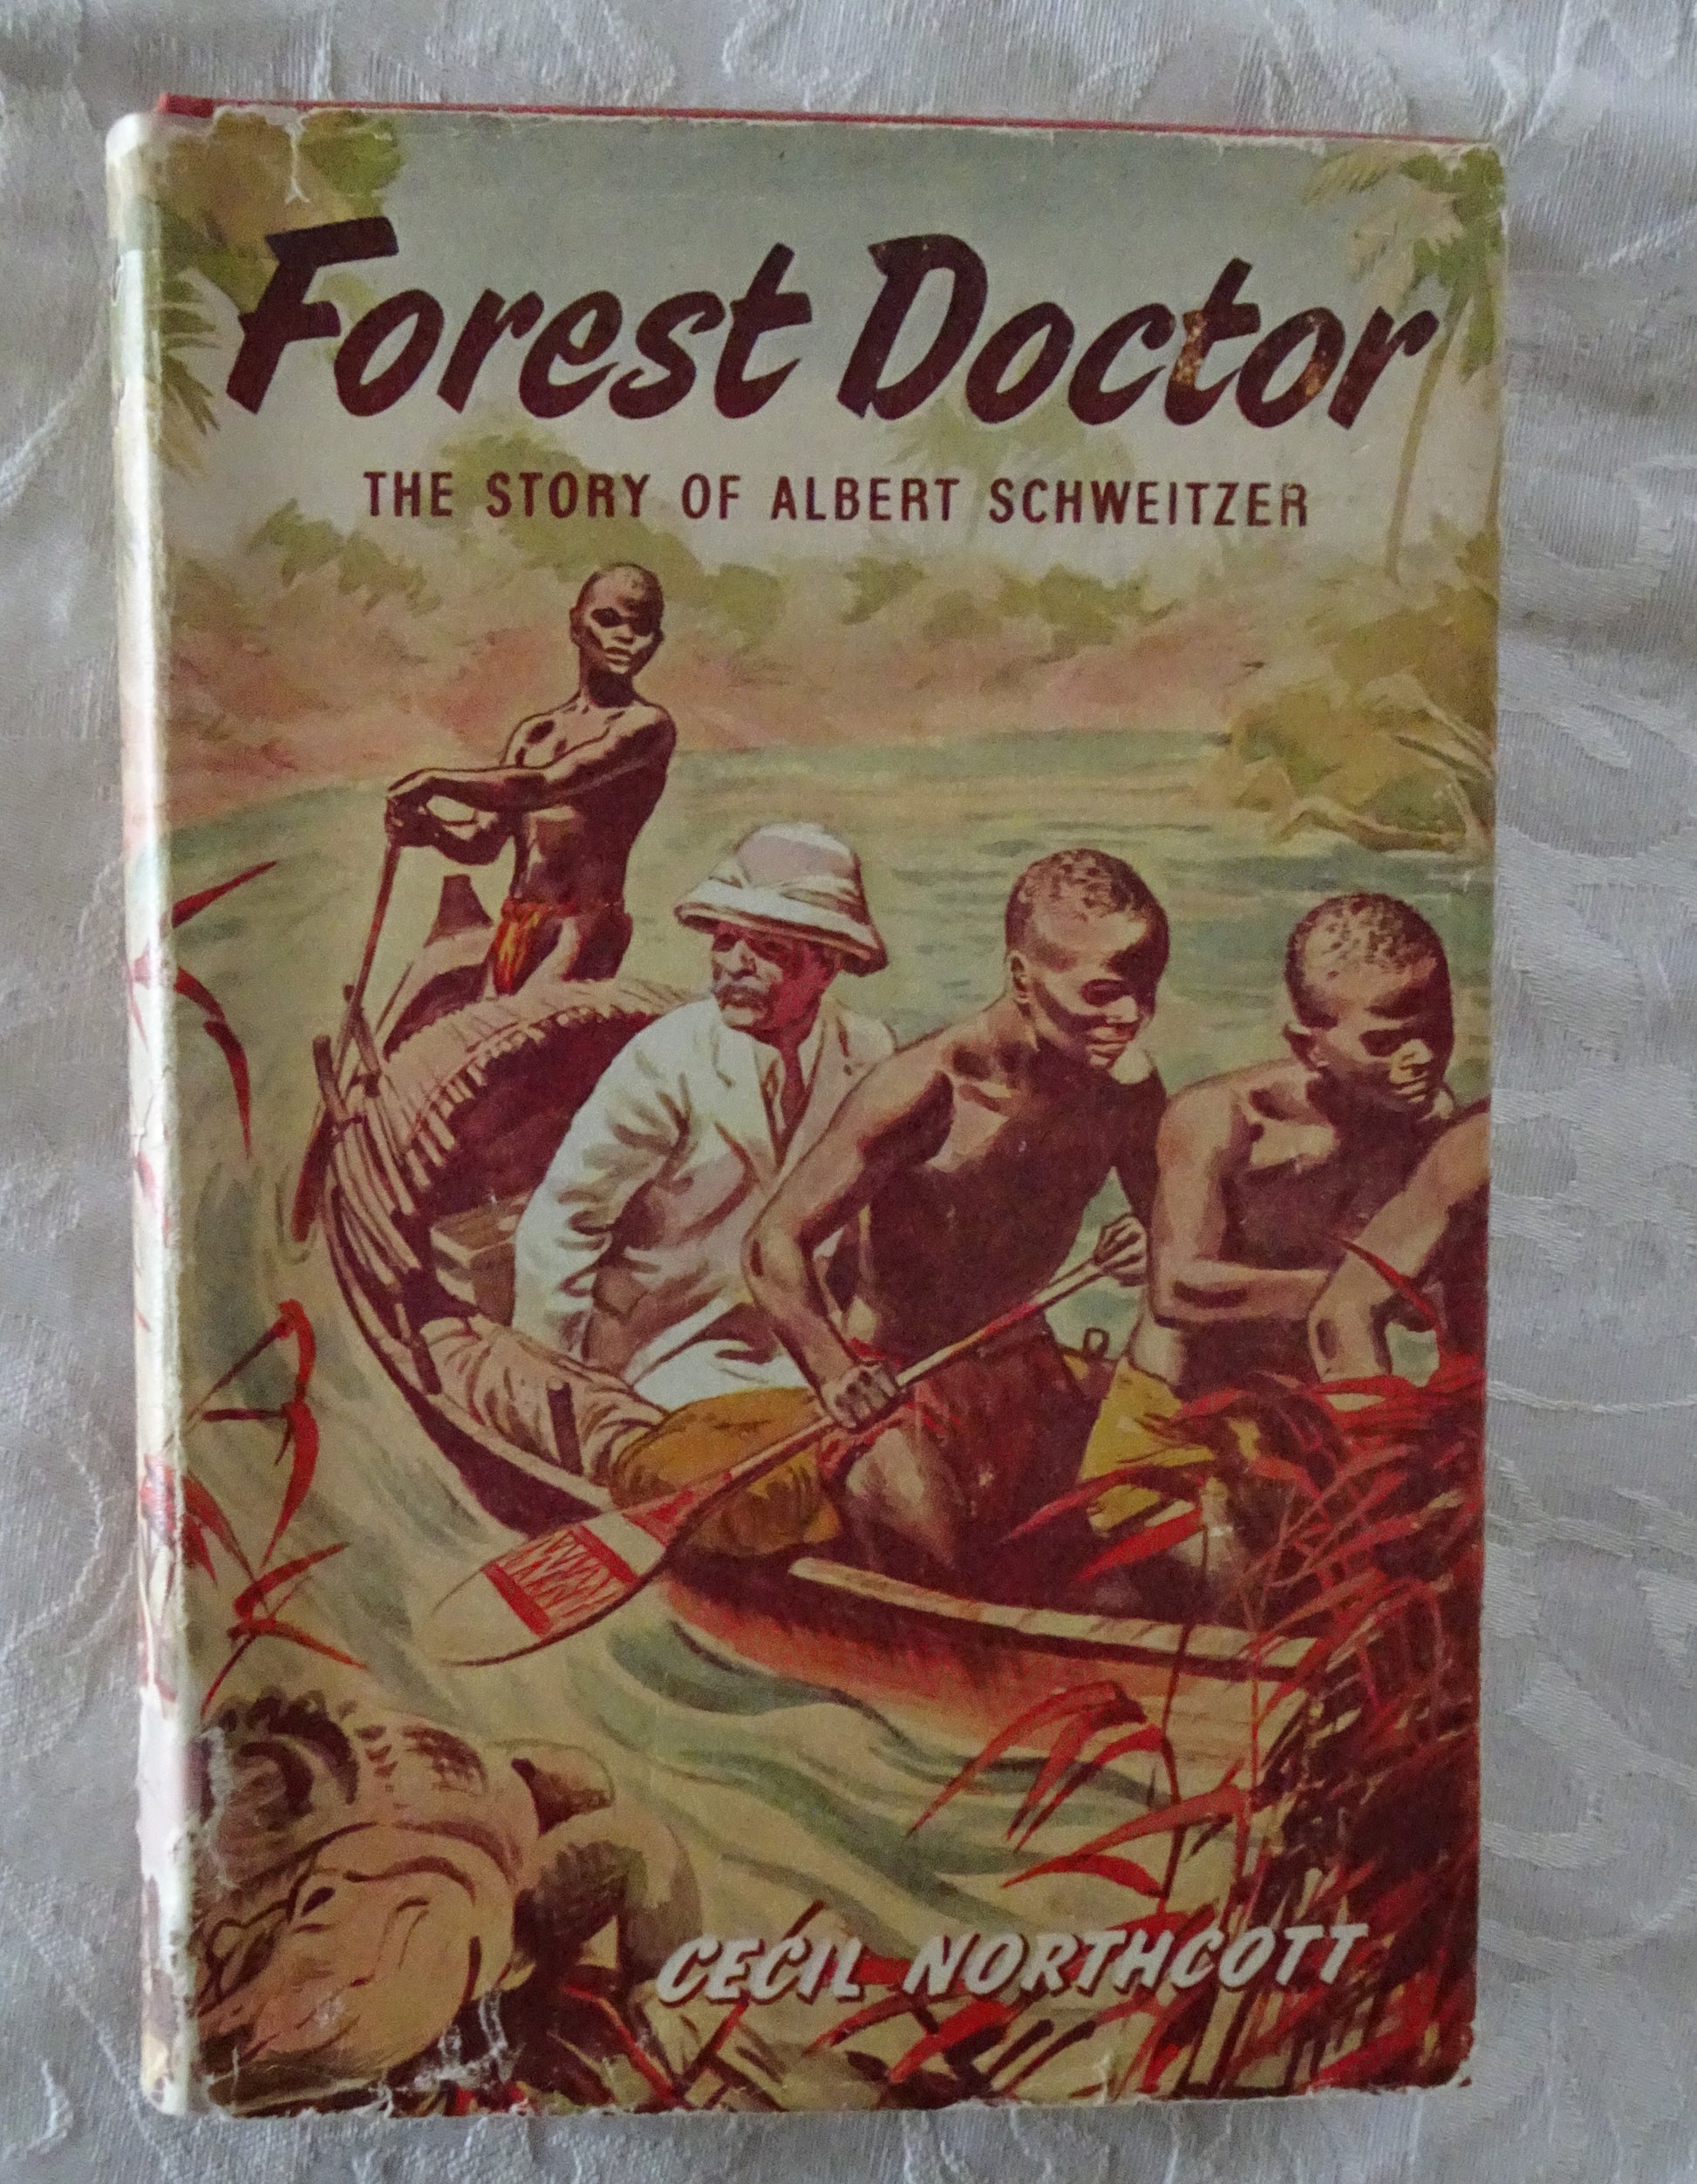 Forest Doctor  The Story of Albert Schweitzer  by Cecil Northcott